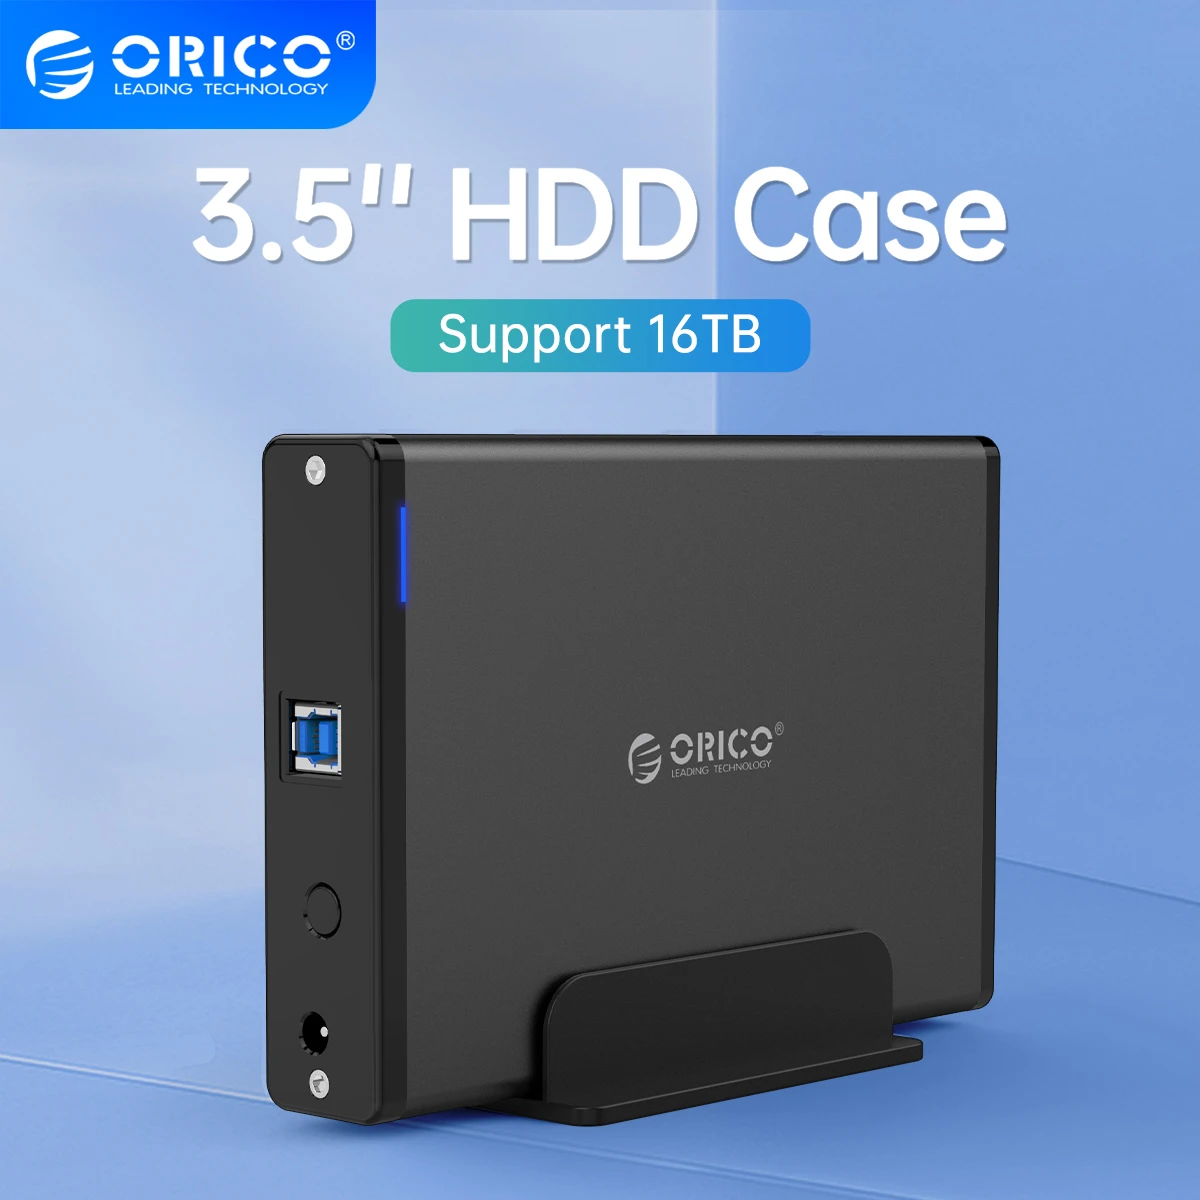 ORICO 3.5'' HDD Case SATA to USB 3.0 Adapter External Hard Drive Enclosure for 2.5" 3.5" Disk HDD Case for PC|hdd enclosure|3.5 inch hdd casehdd case - AliExpress